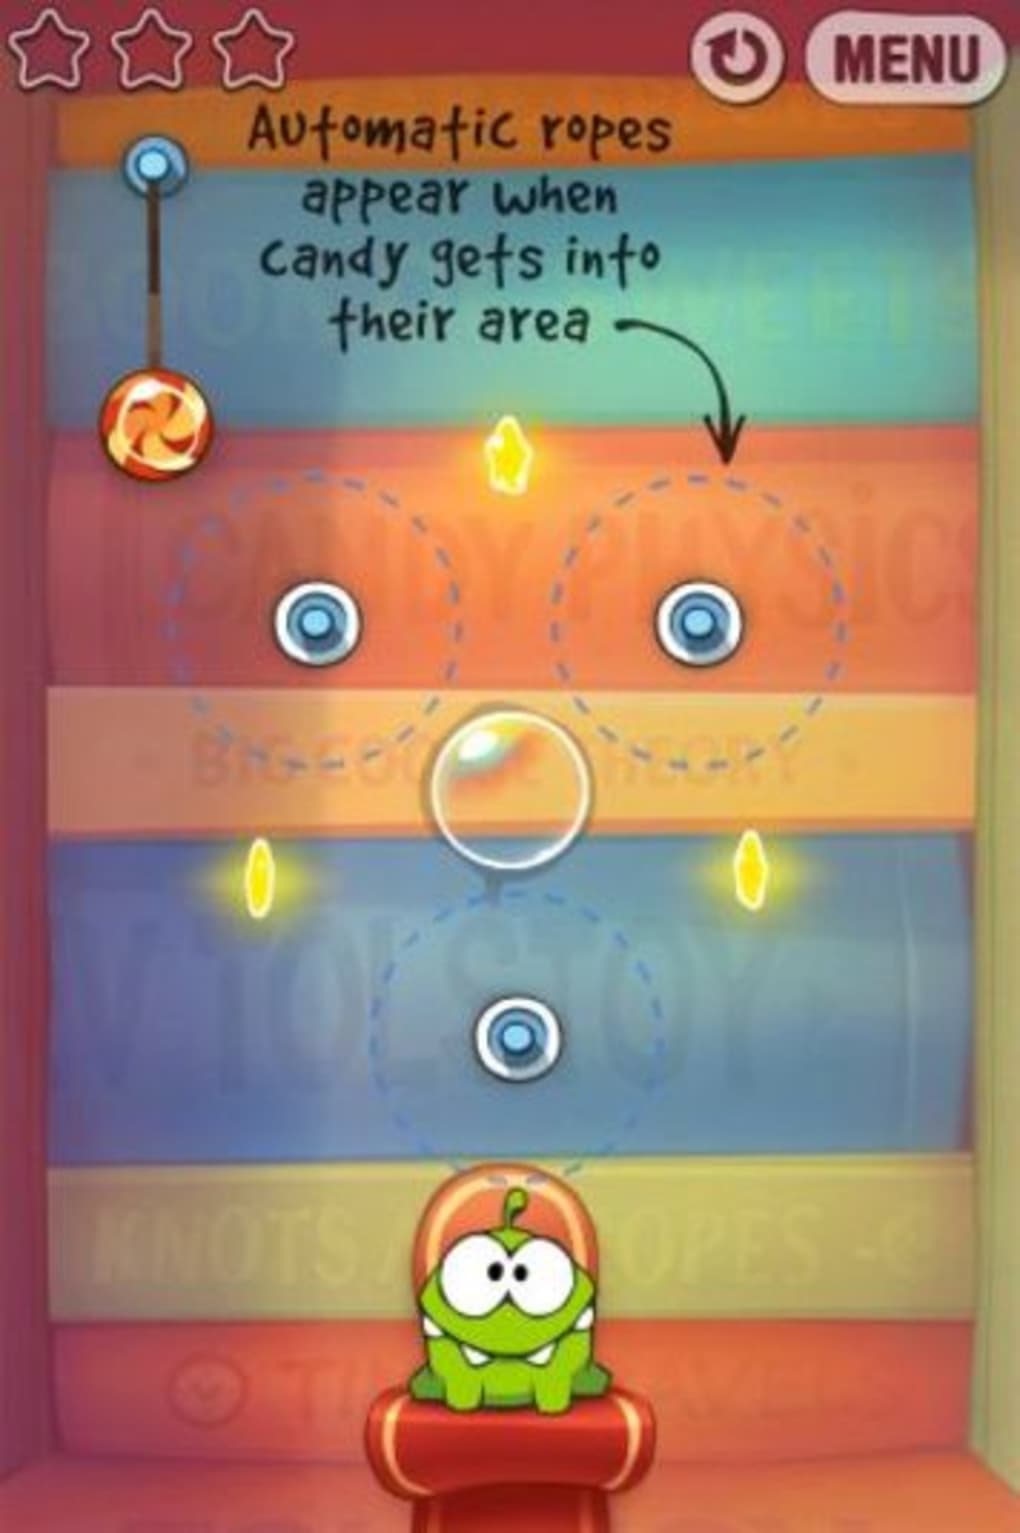 Om Nom returns in Cut the Rope: Experiments - CNET